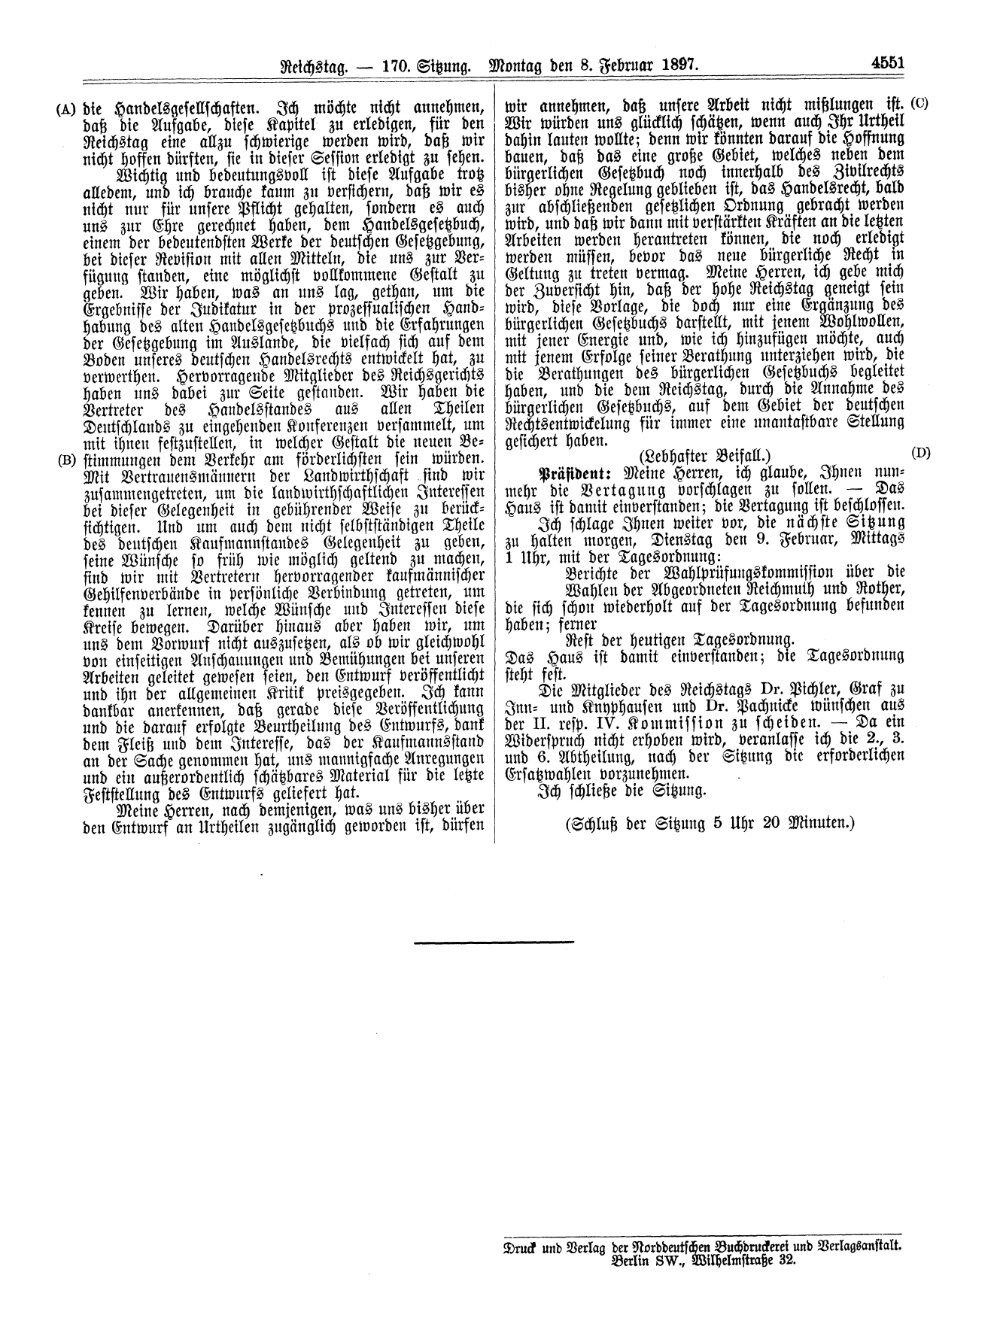 Scan of page 4551